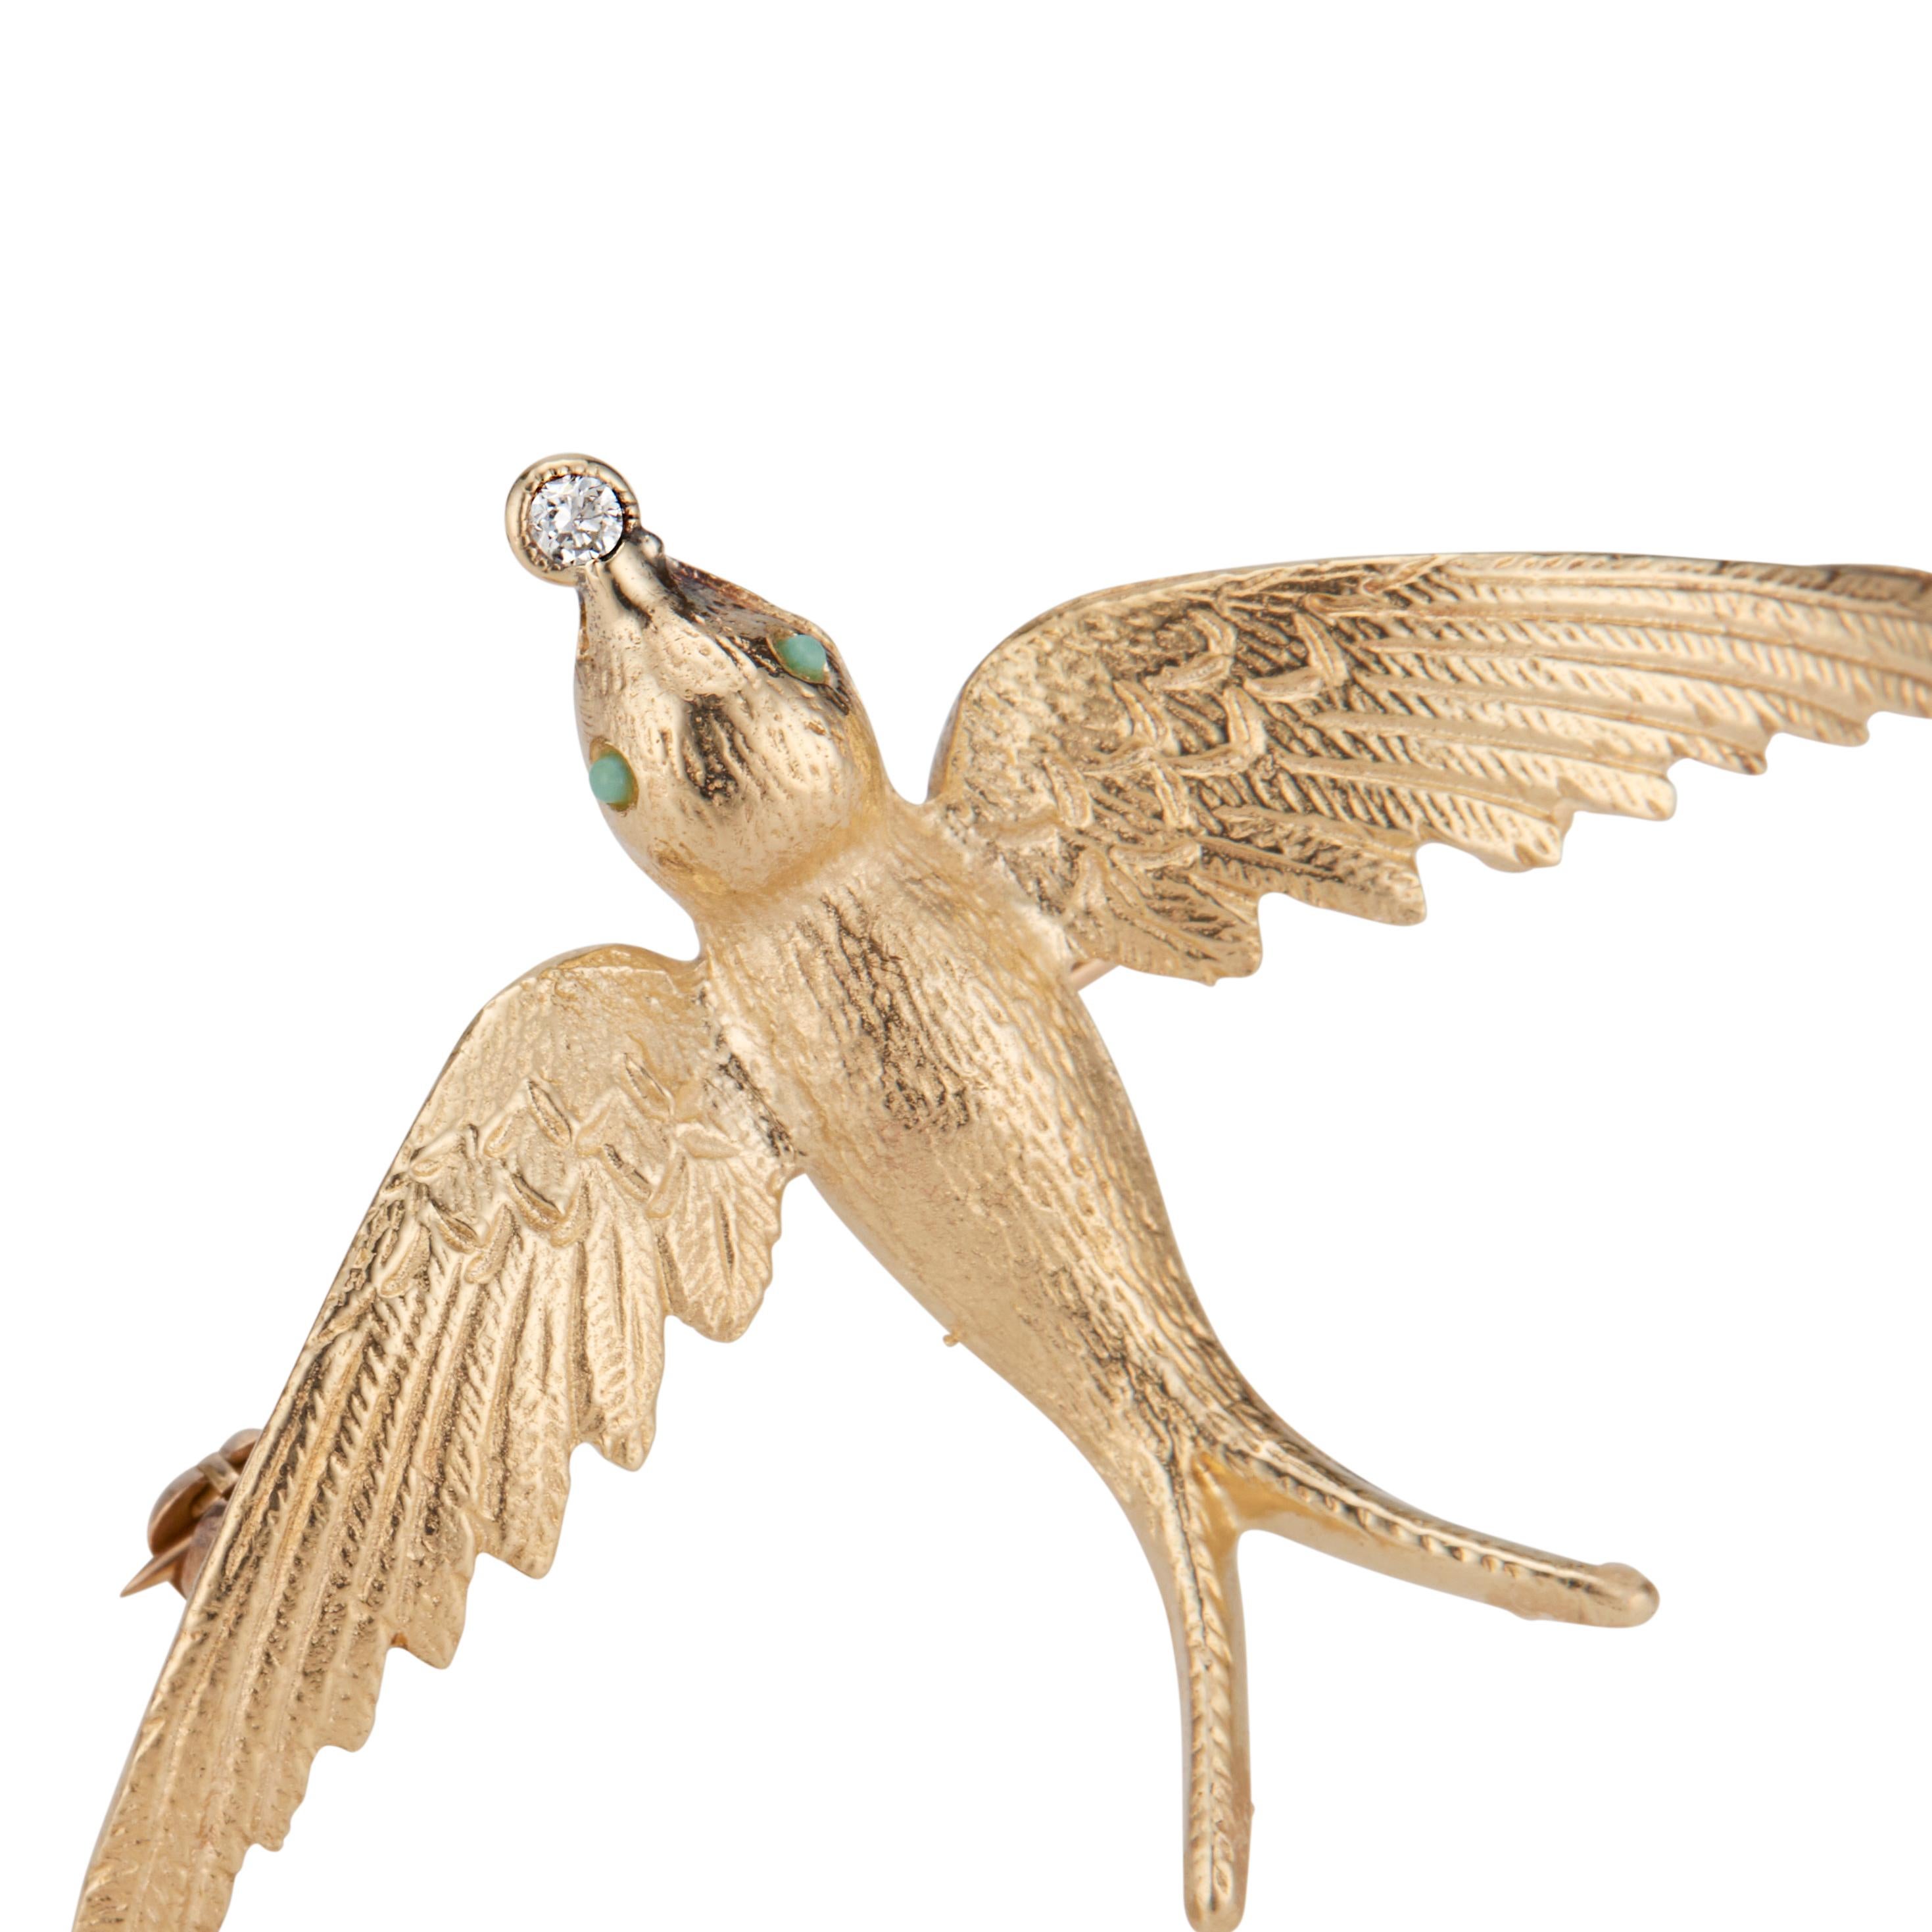 Vintage 1960's swallow brooch. Turquoise eyes with a round diamond beak set in 14k yellow gold.

1 round diamond, approx. total weight .015cts, I, SI
2 round Turquoise, 1mm
14k yellow gold
Tested: 14k
Stamped: 15ct 14k
Hallmark: 74 14k (shield